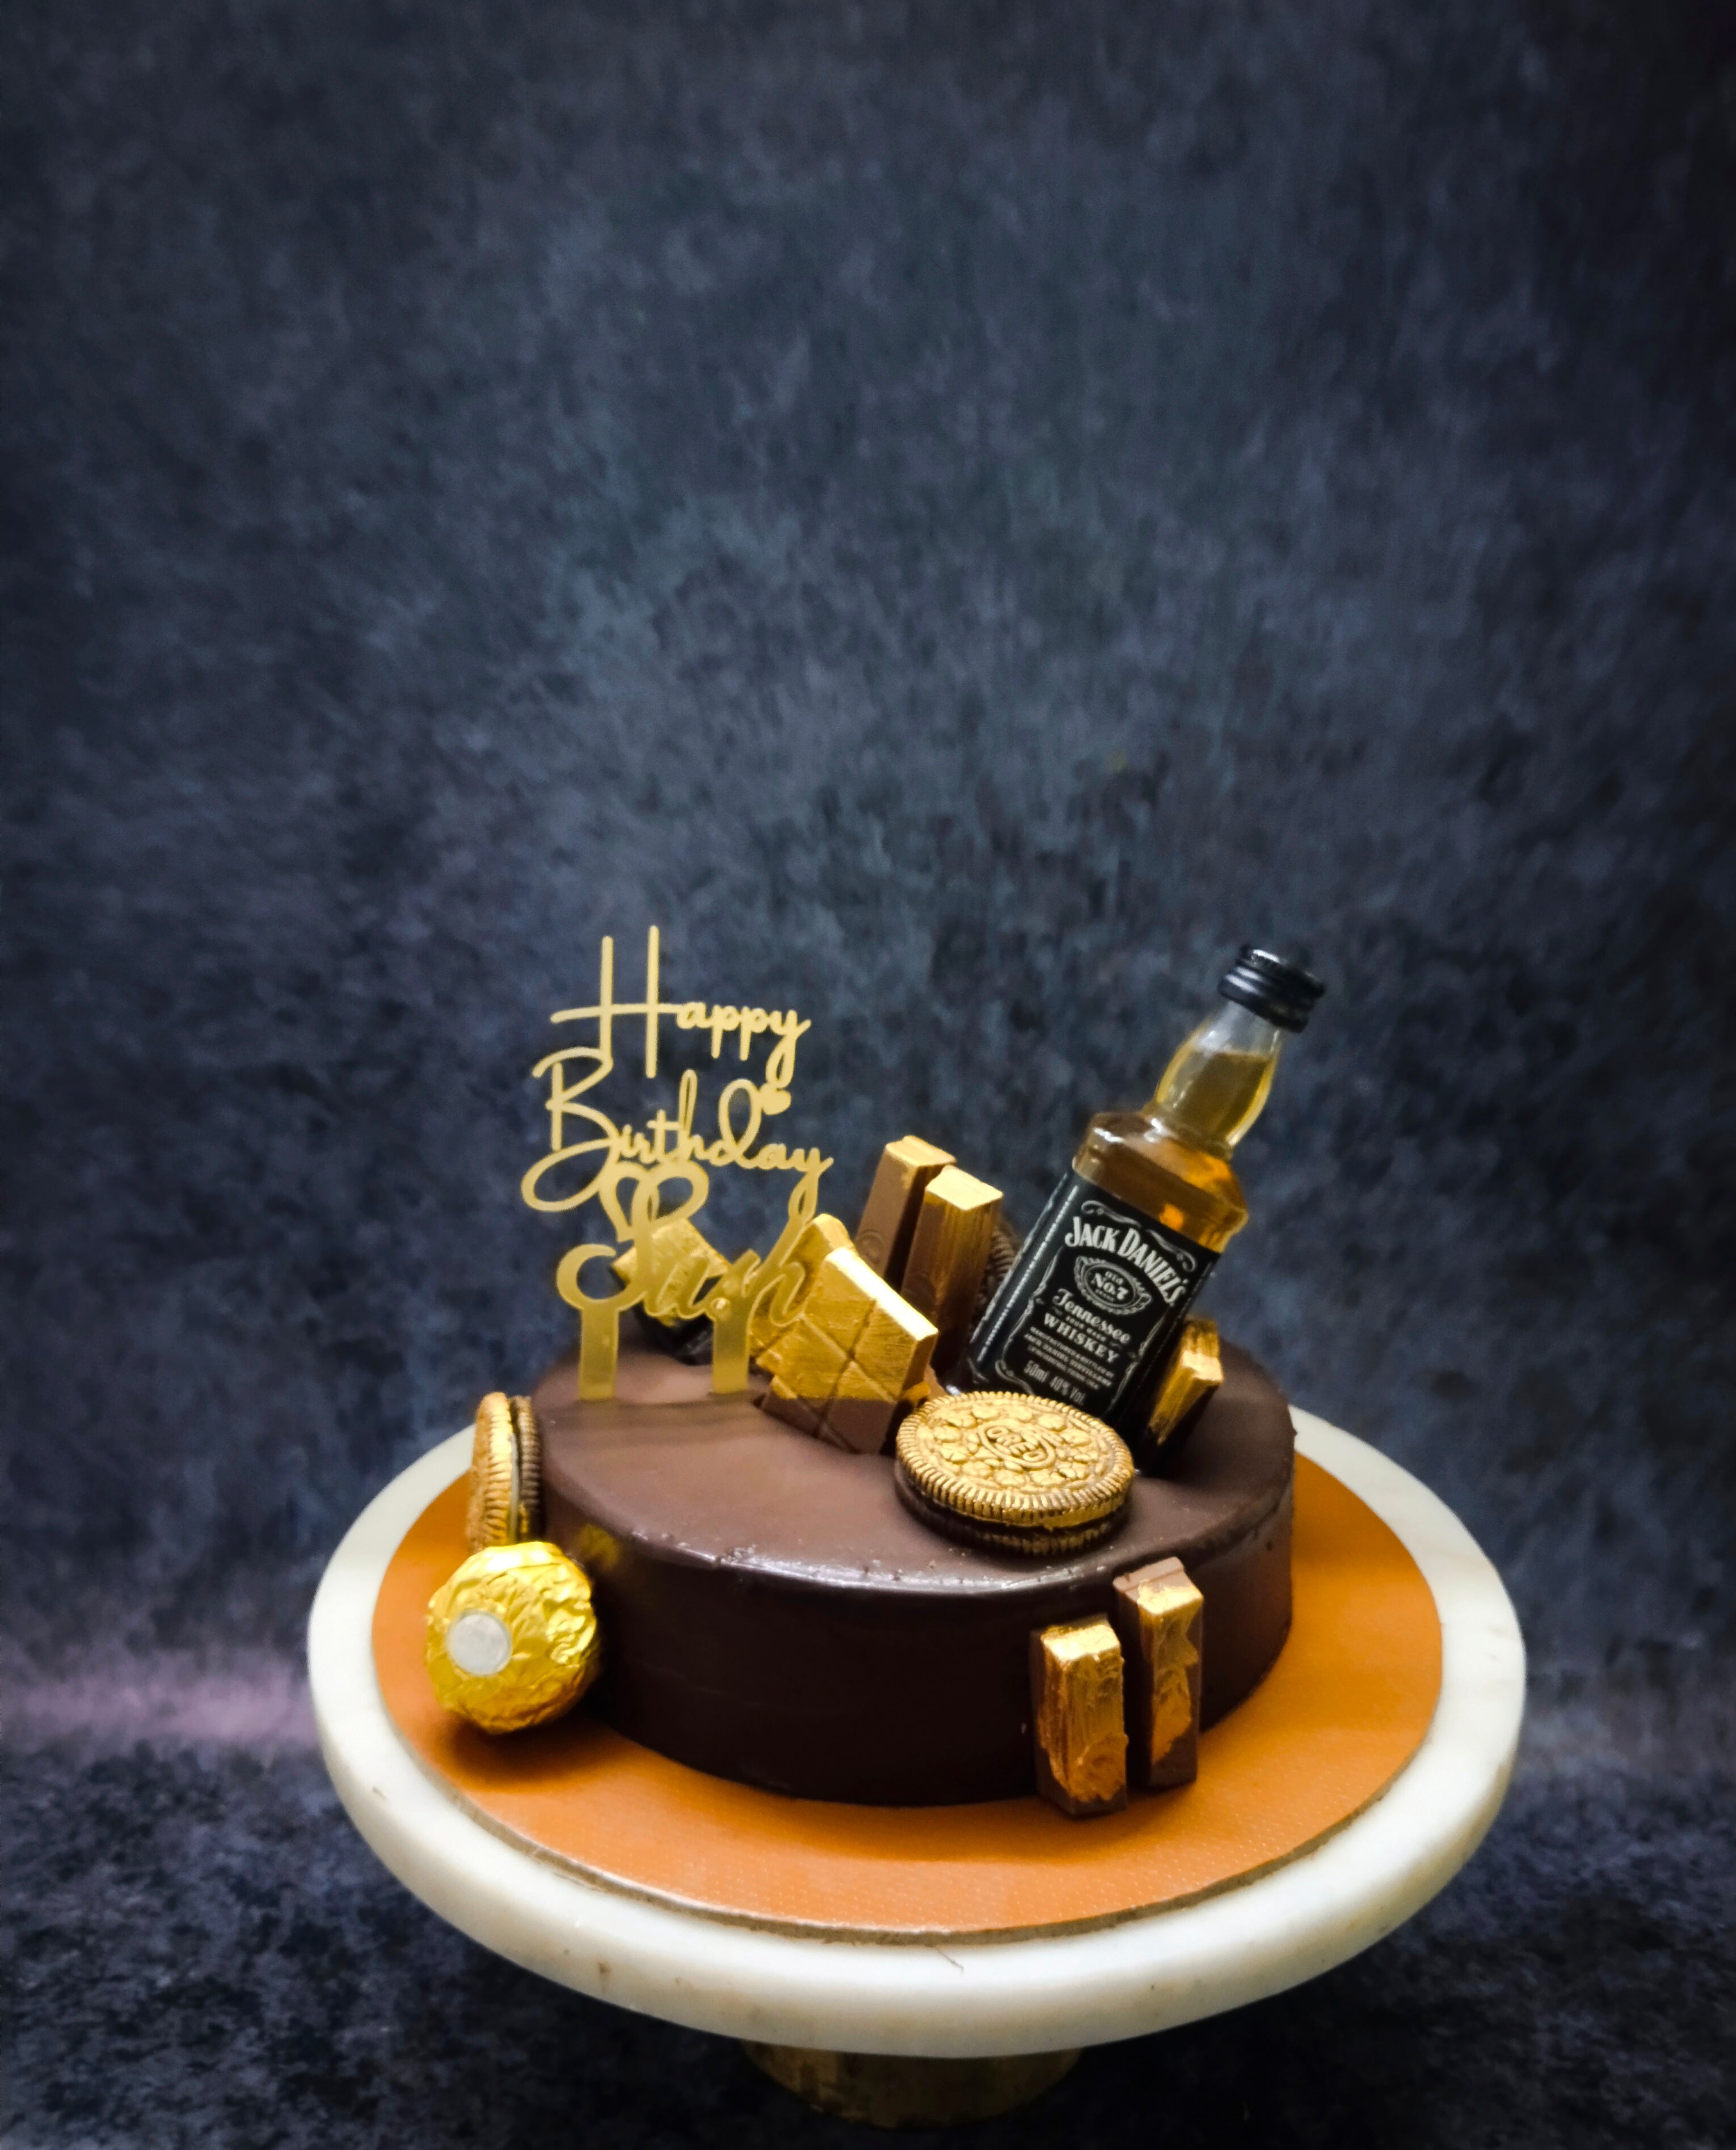 Birthday cake for a DAD with alcohol miniatures 🥃 | Instagram